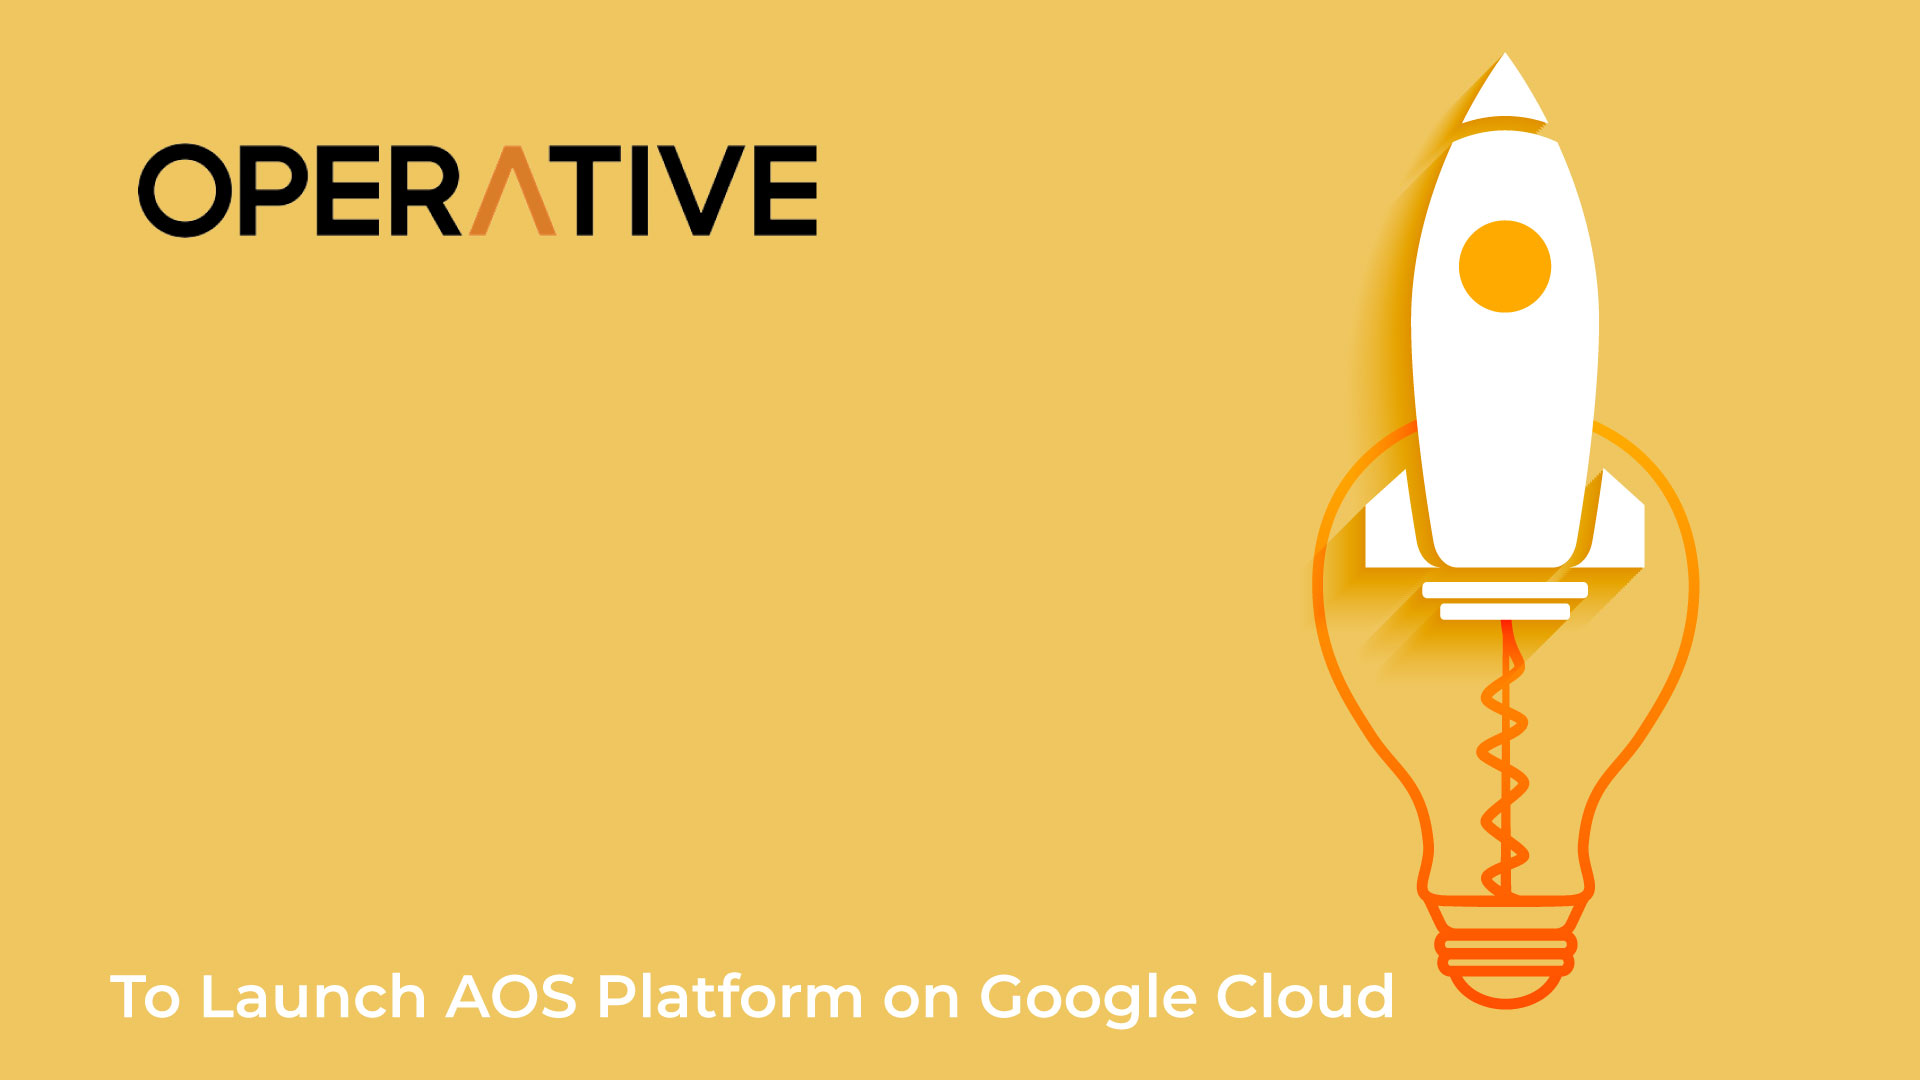 Operative to Offer AOS Platform on Google Cloud for Retail Media